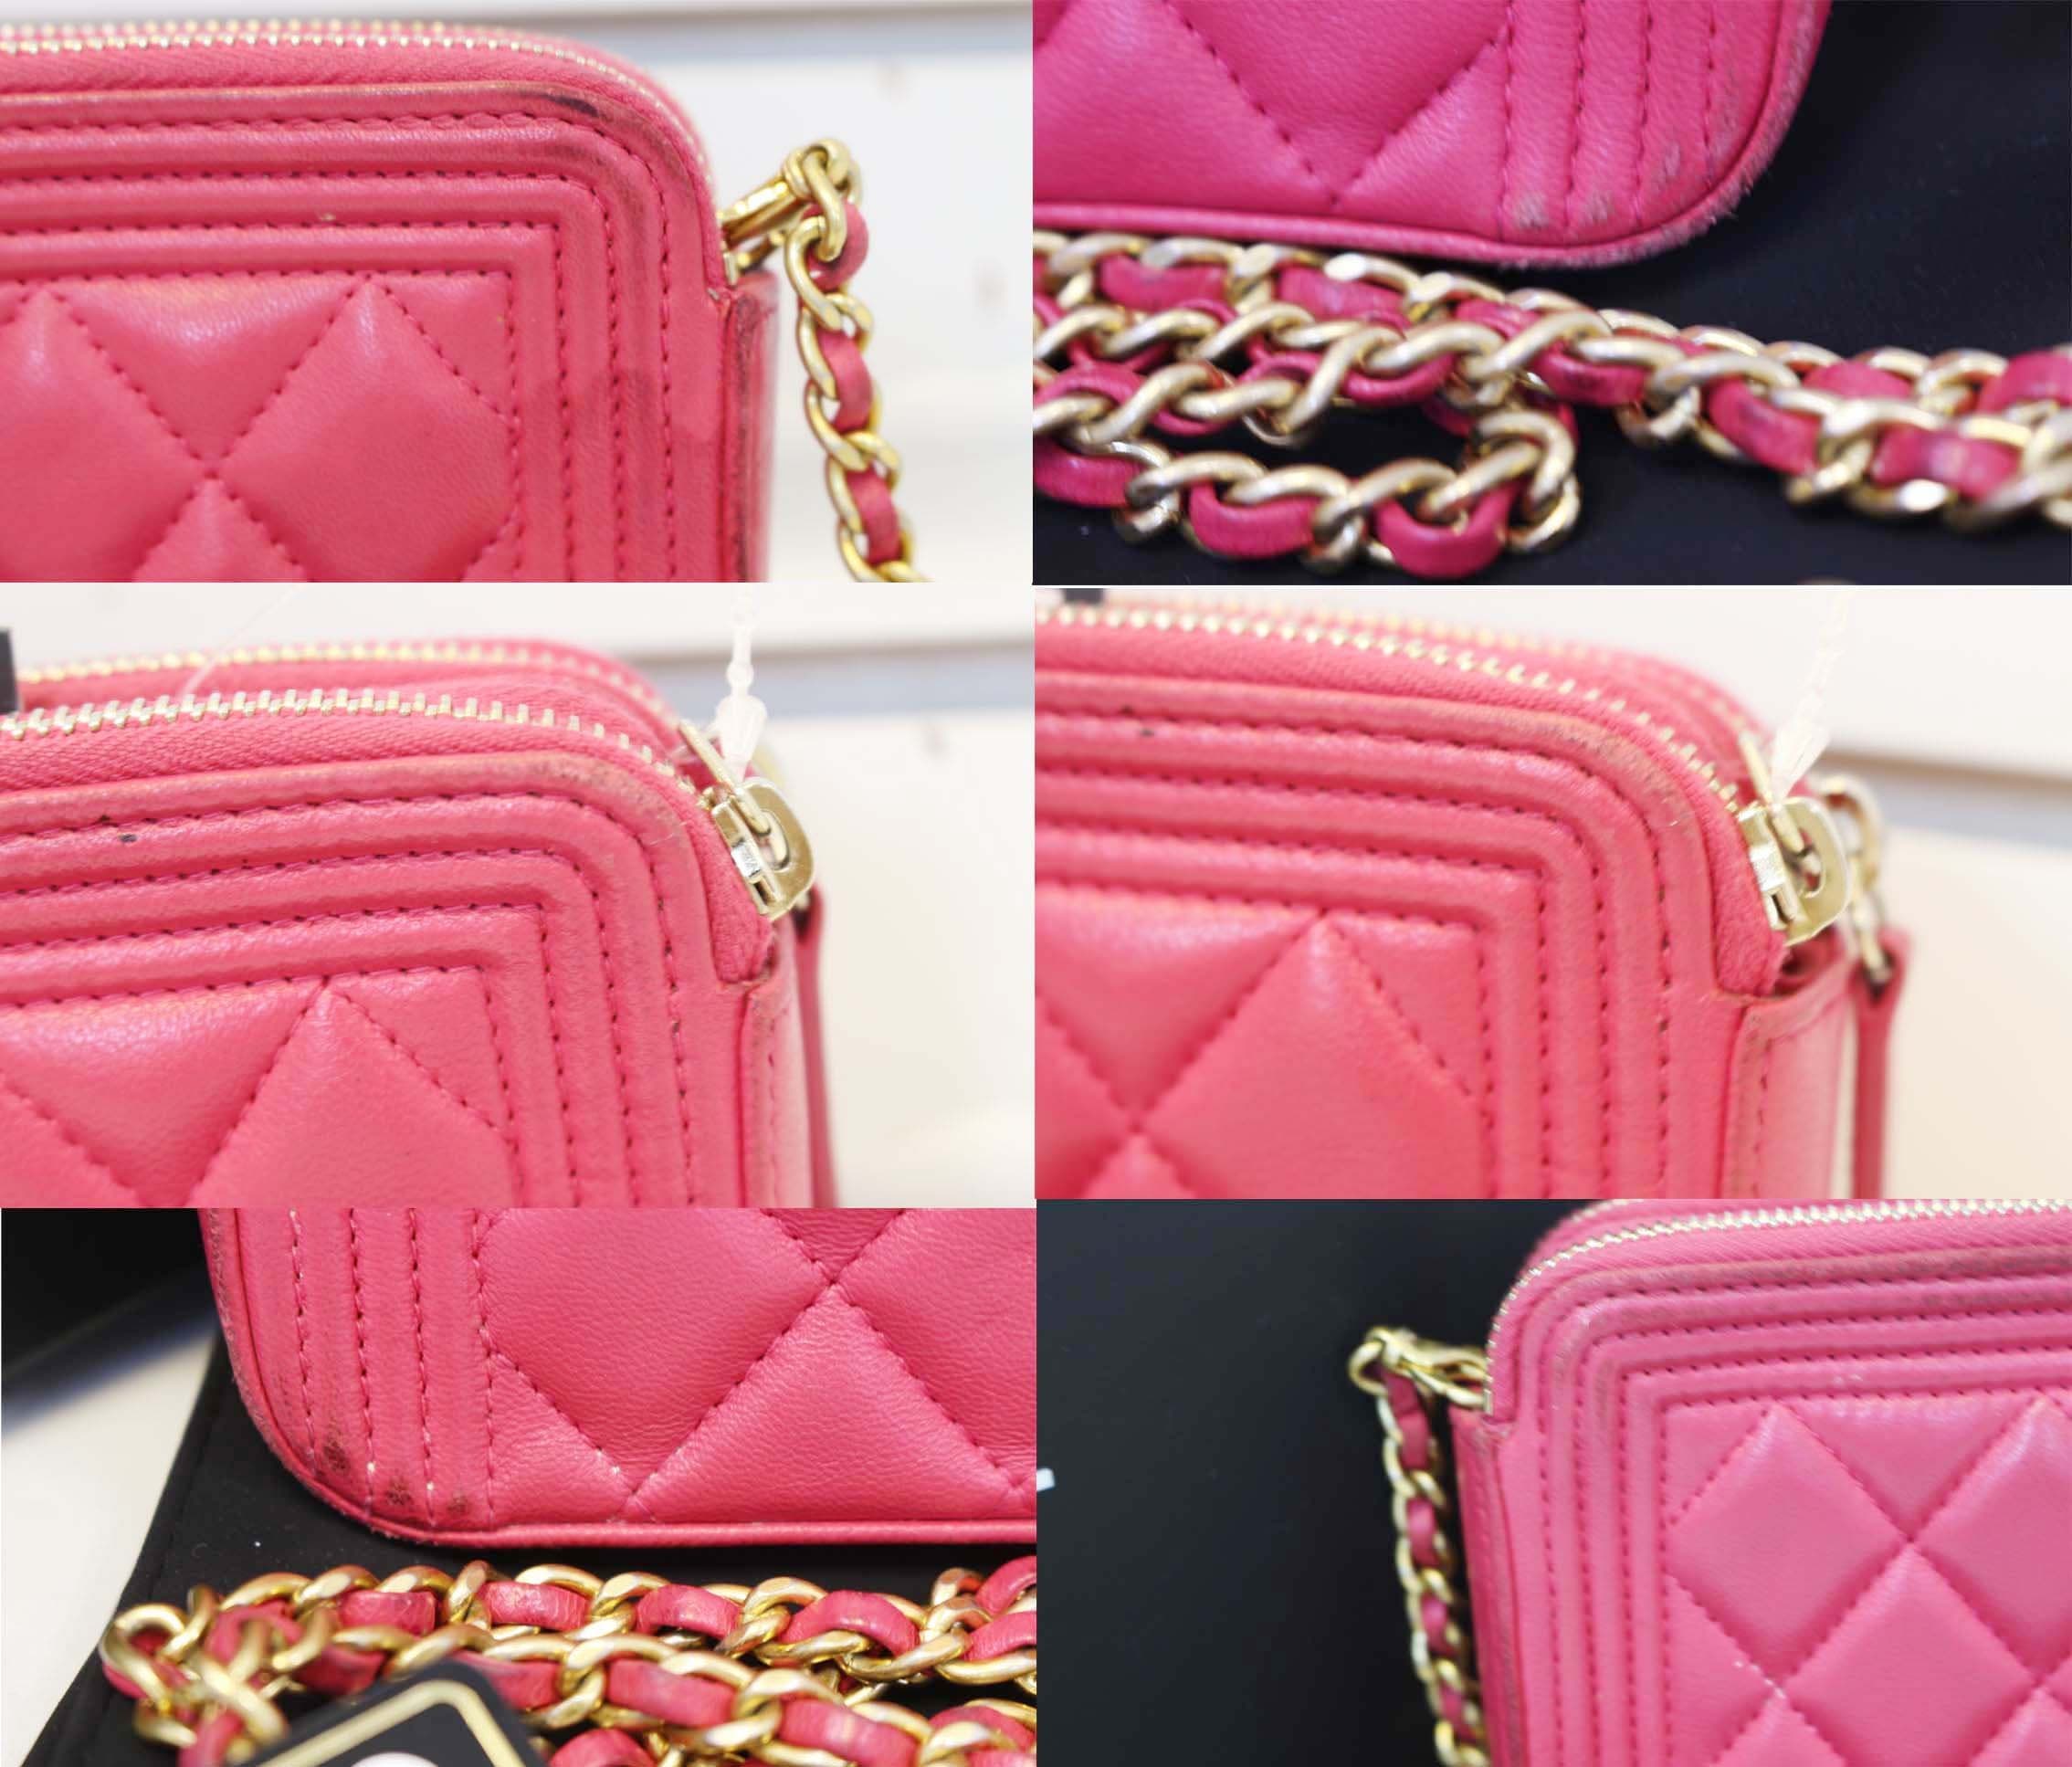 Twice The Love With These Chanel 19 Wallet On Chain Bags - BAGAHOLICBOY